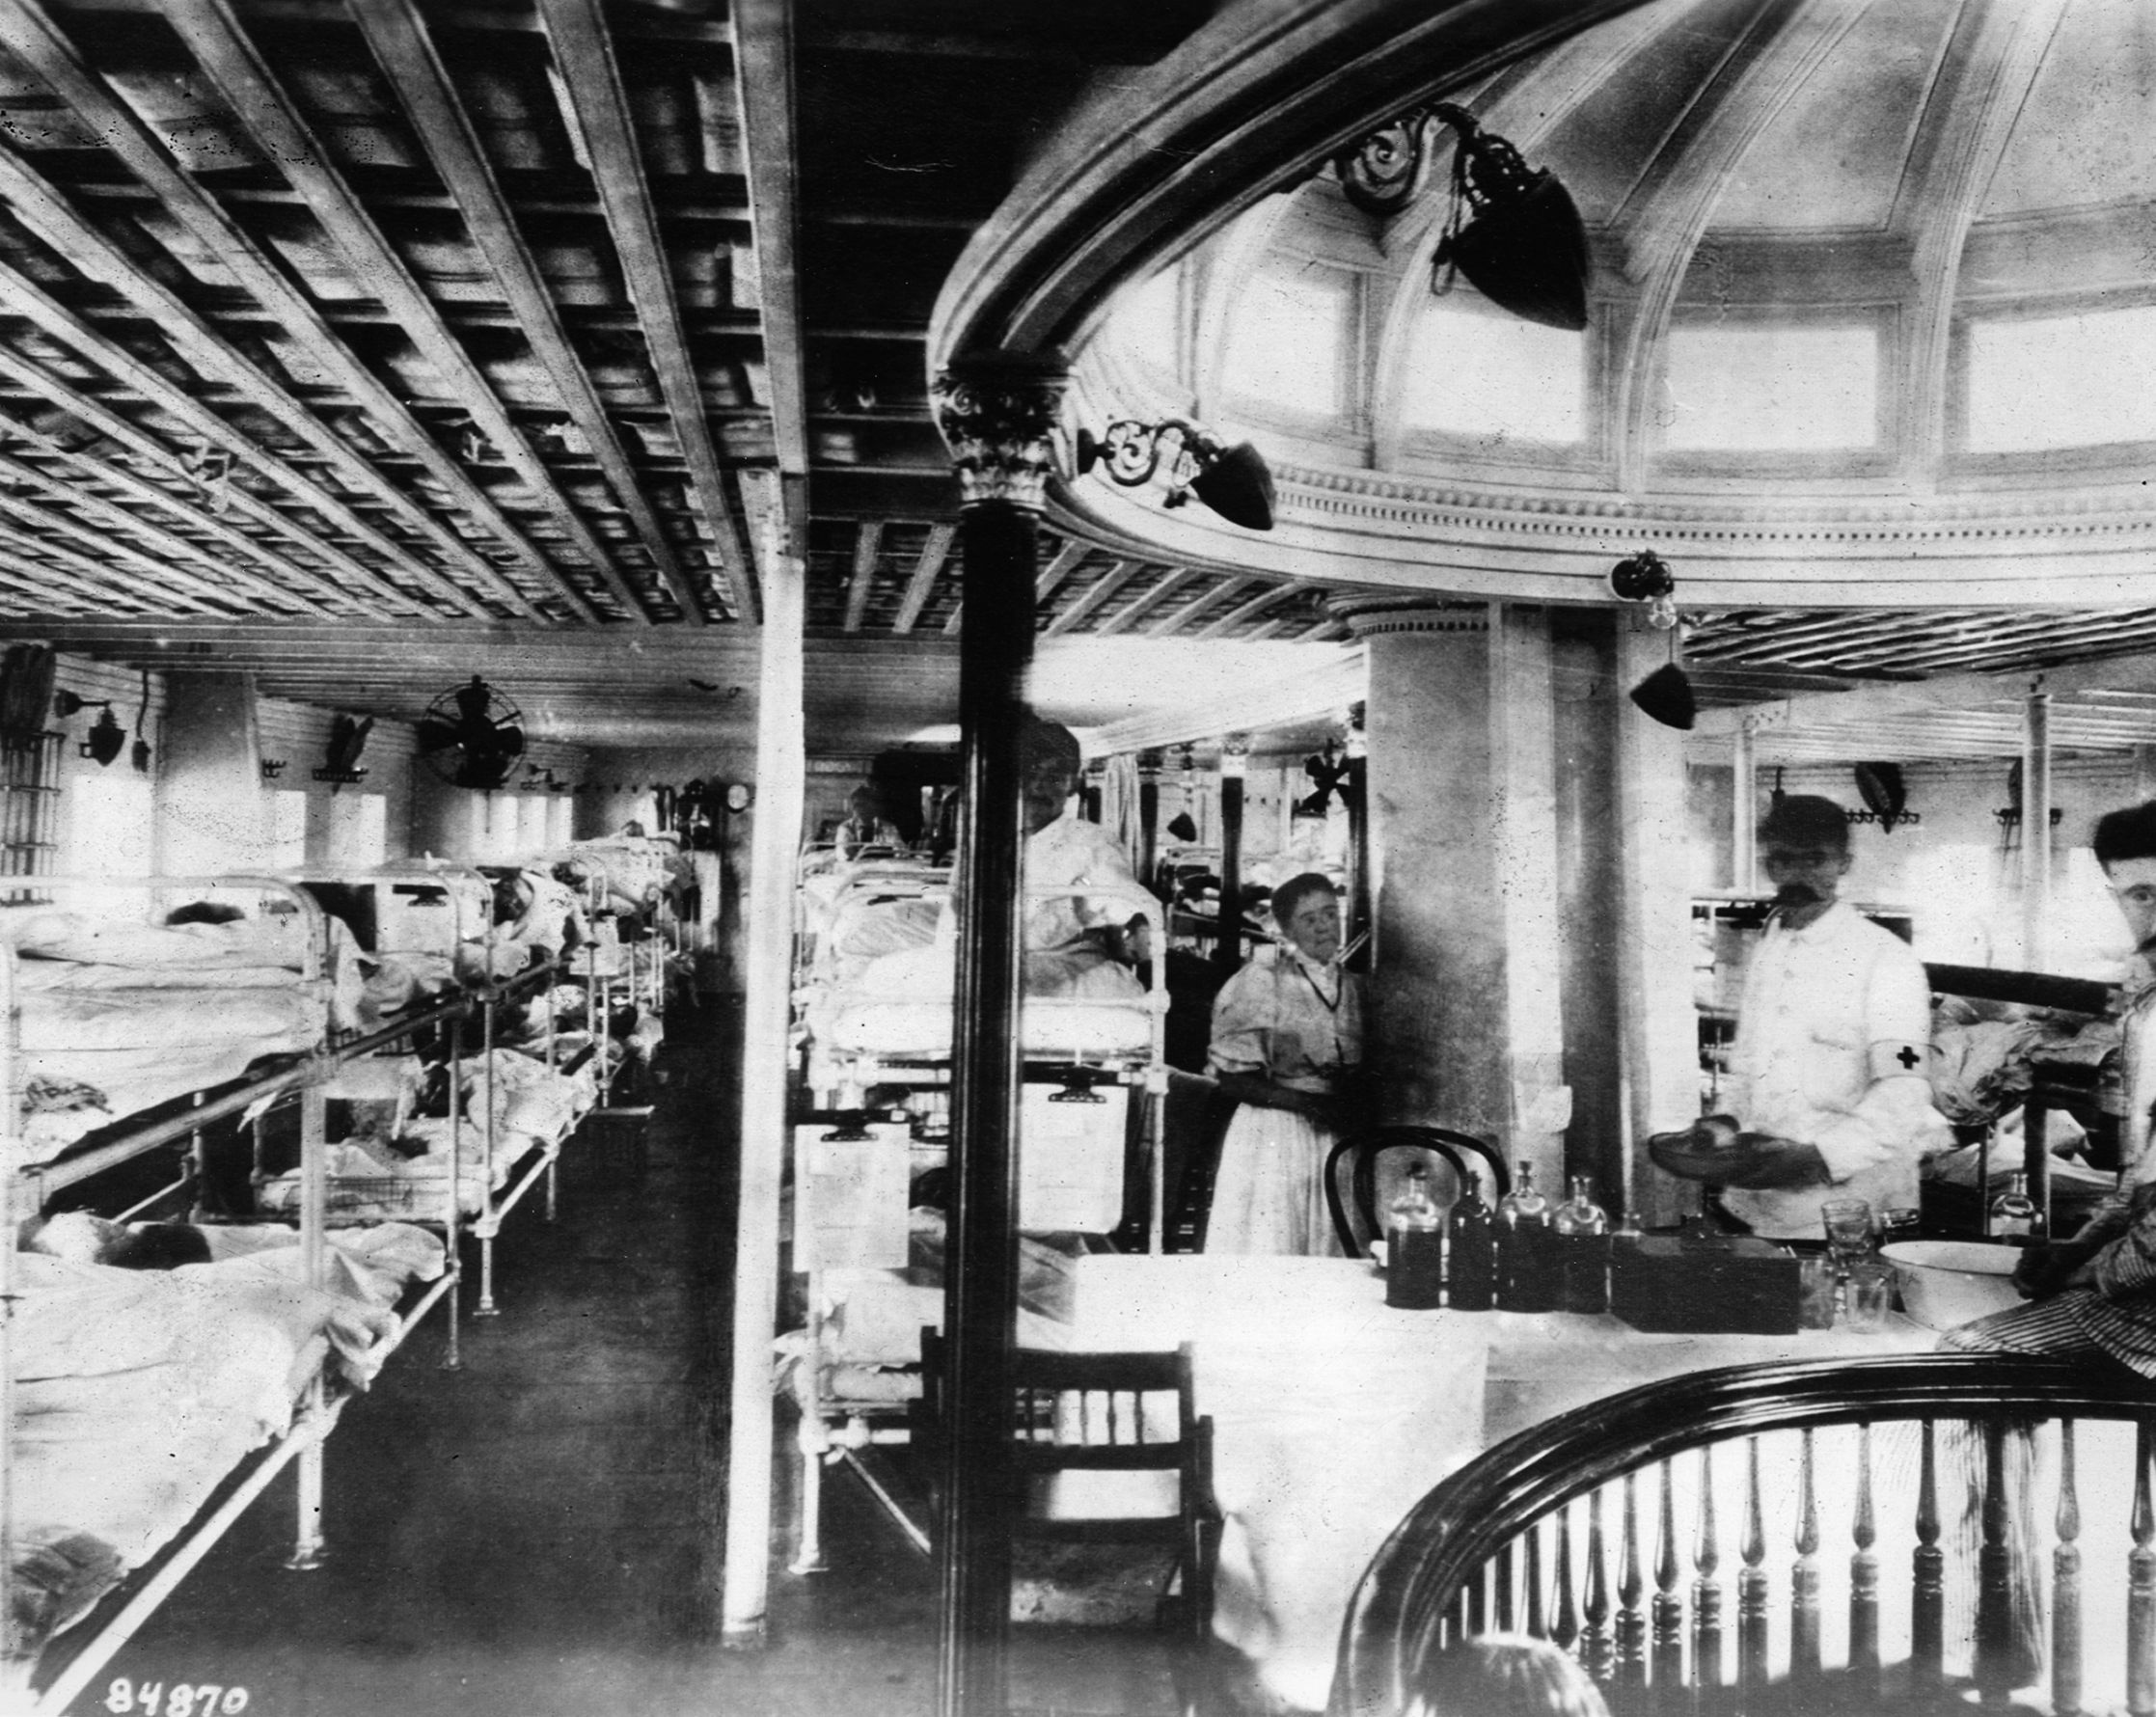 The interior of a hospital ship shows the vast capacity to deal with wounded soldiers.